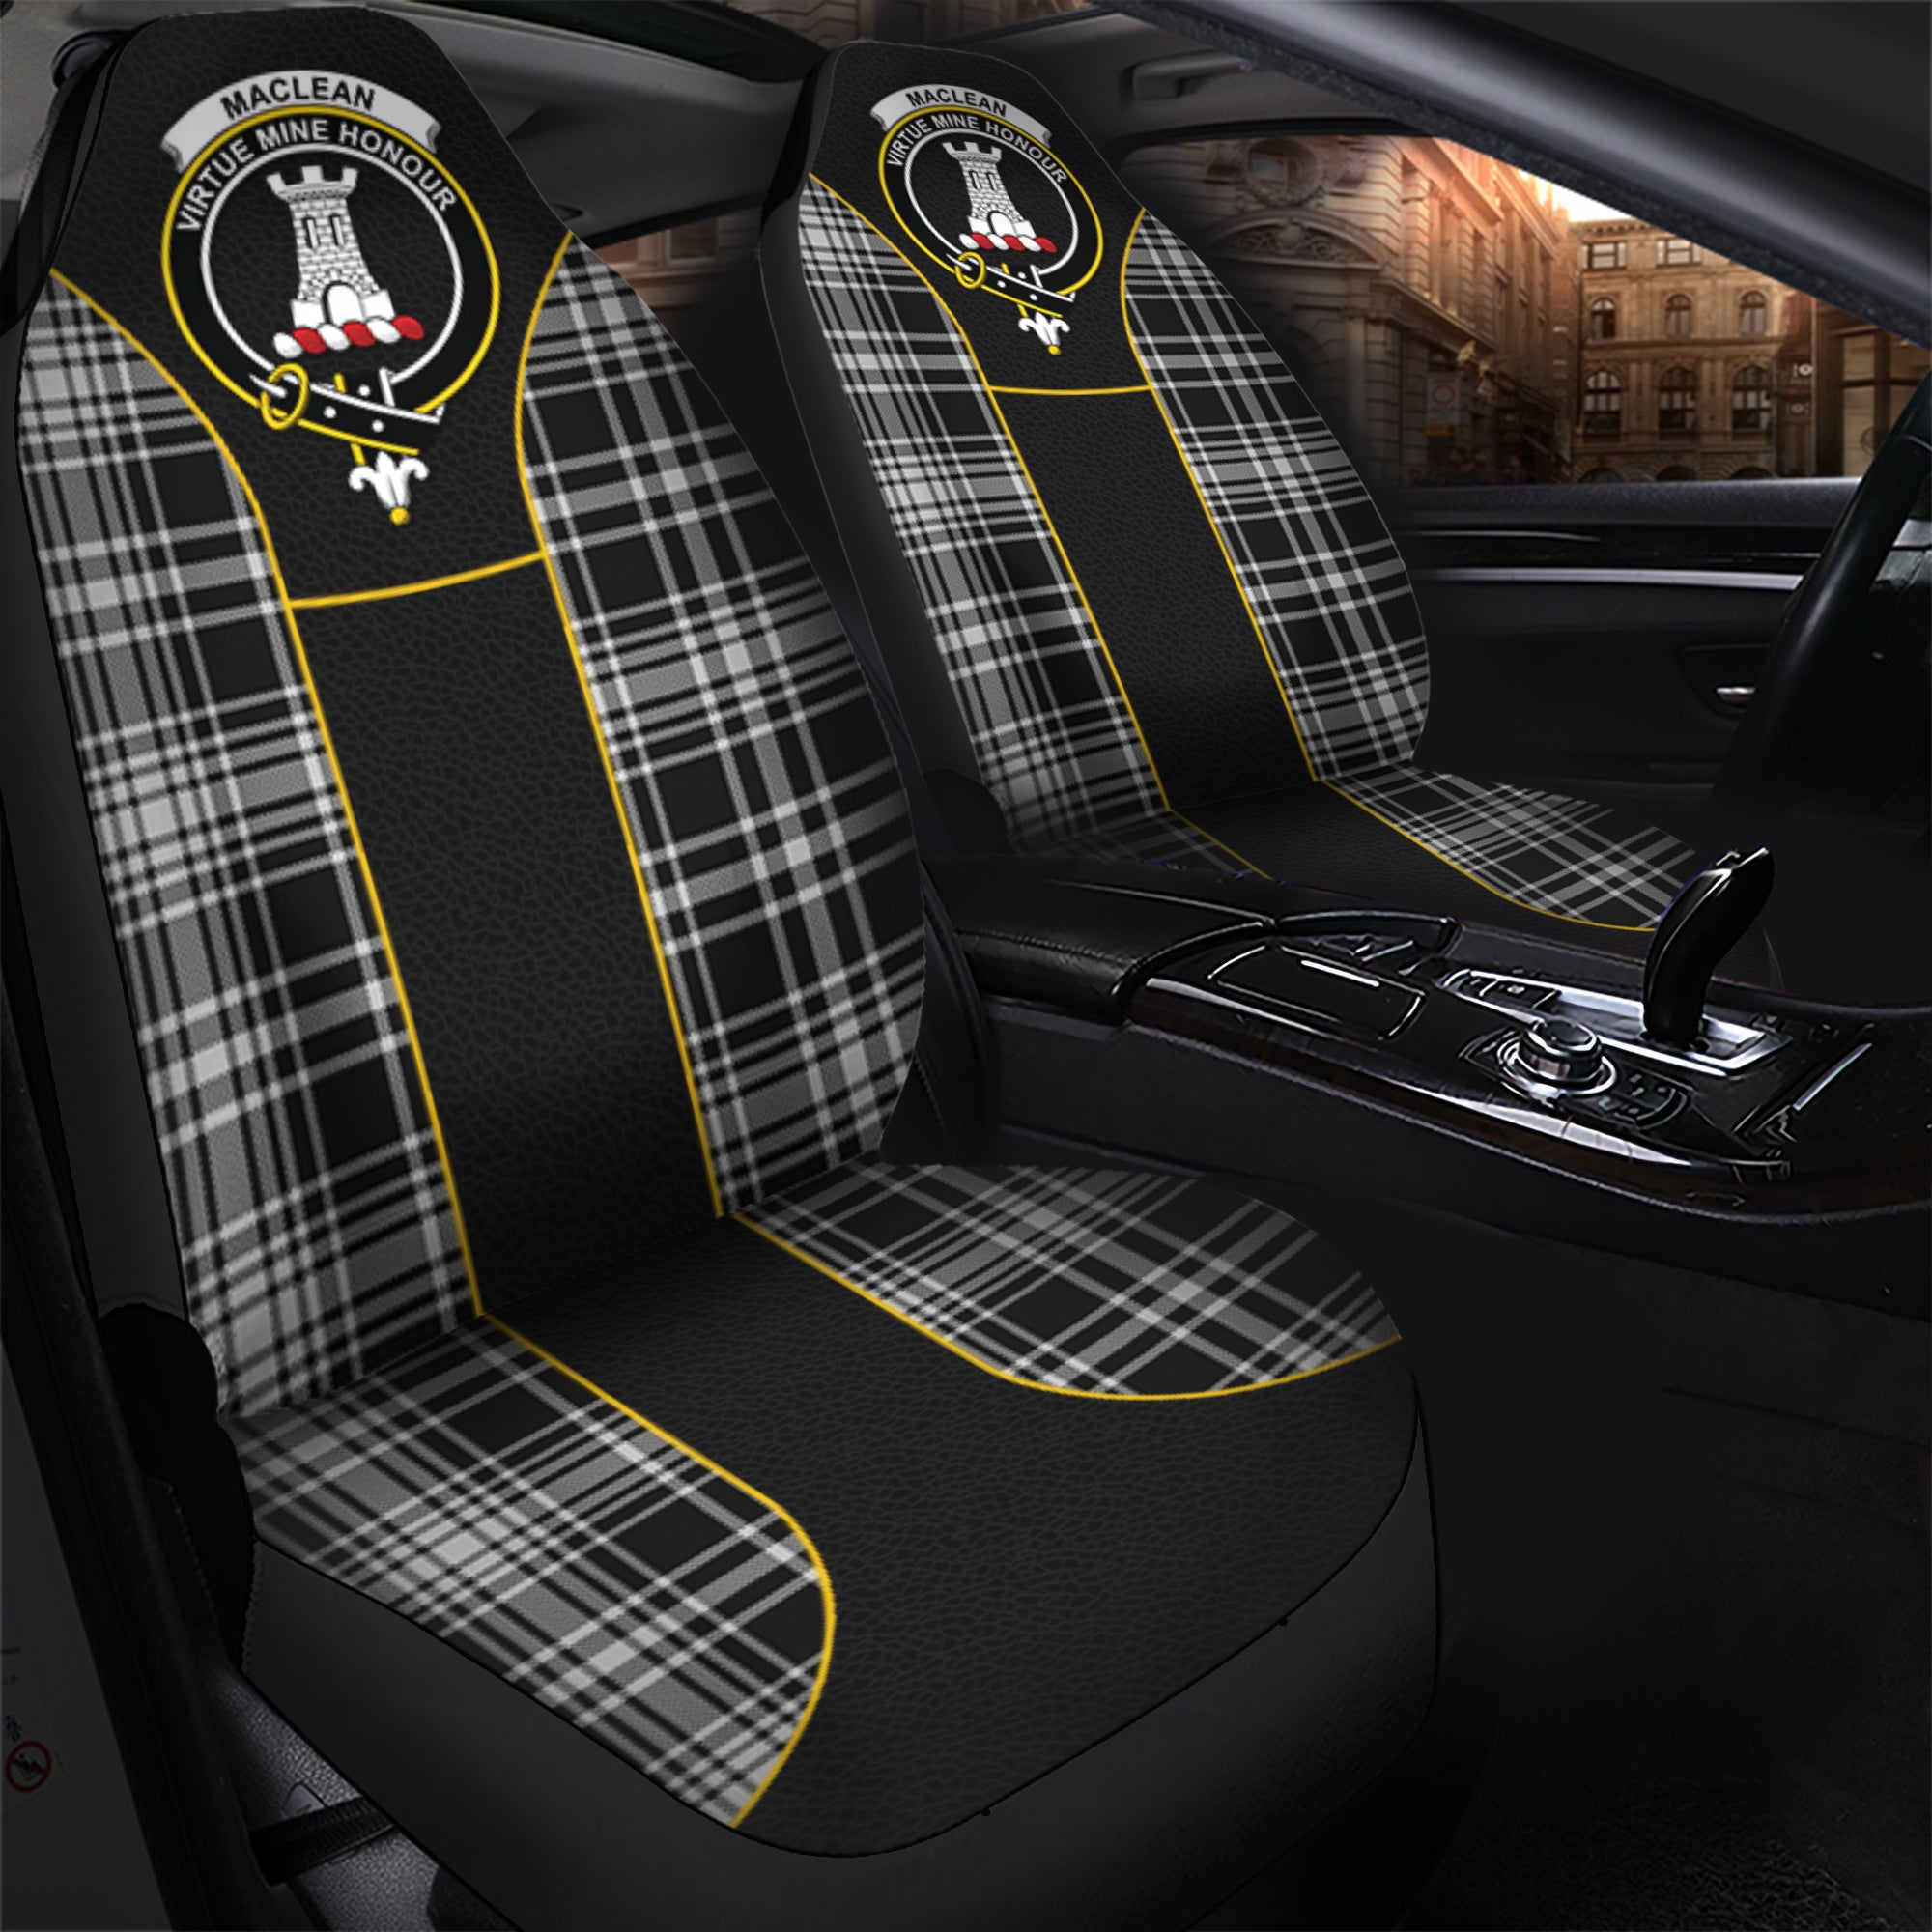 scottish-maclean-black-and-white-tartan-crest-car-seat-cover-special-style